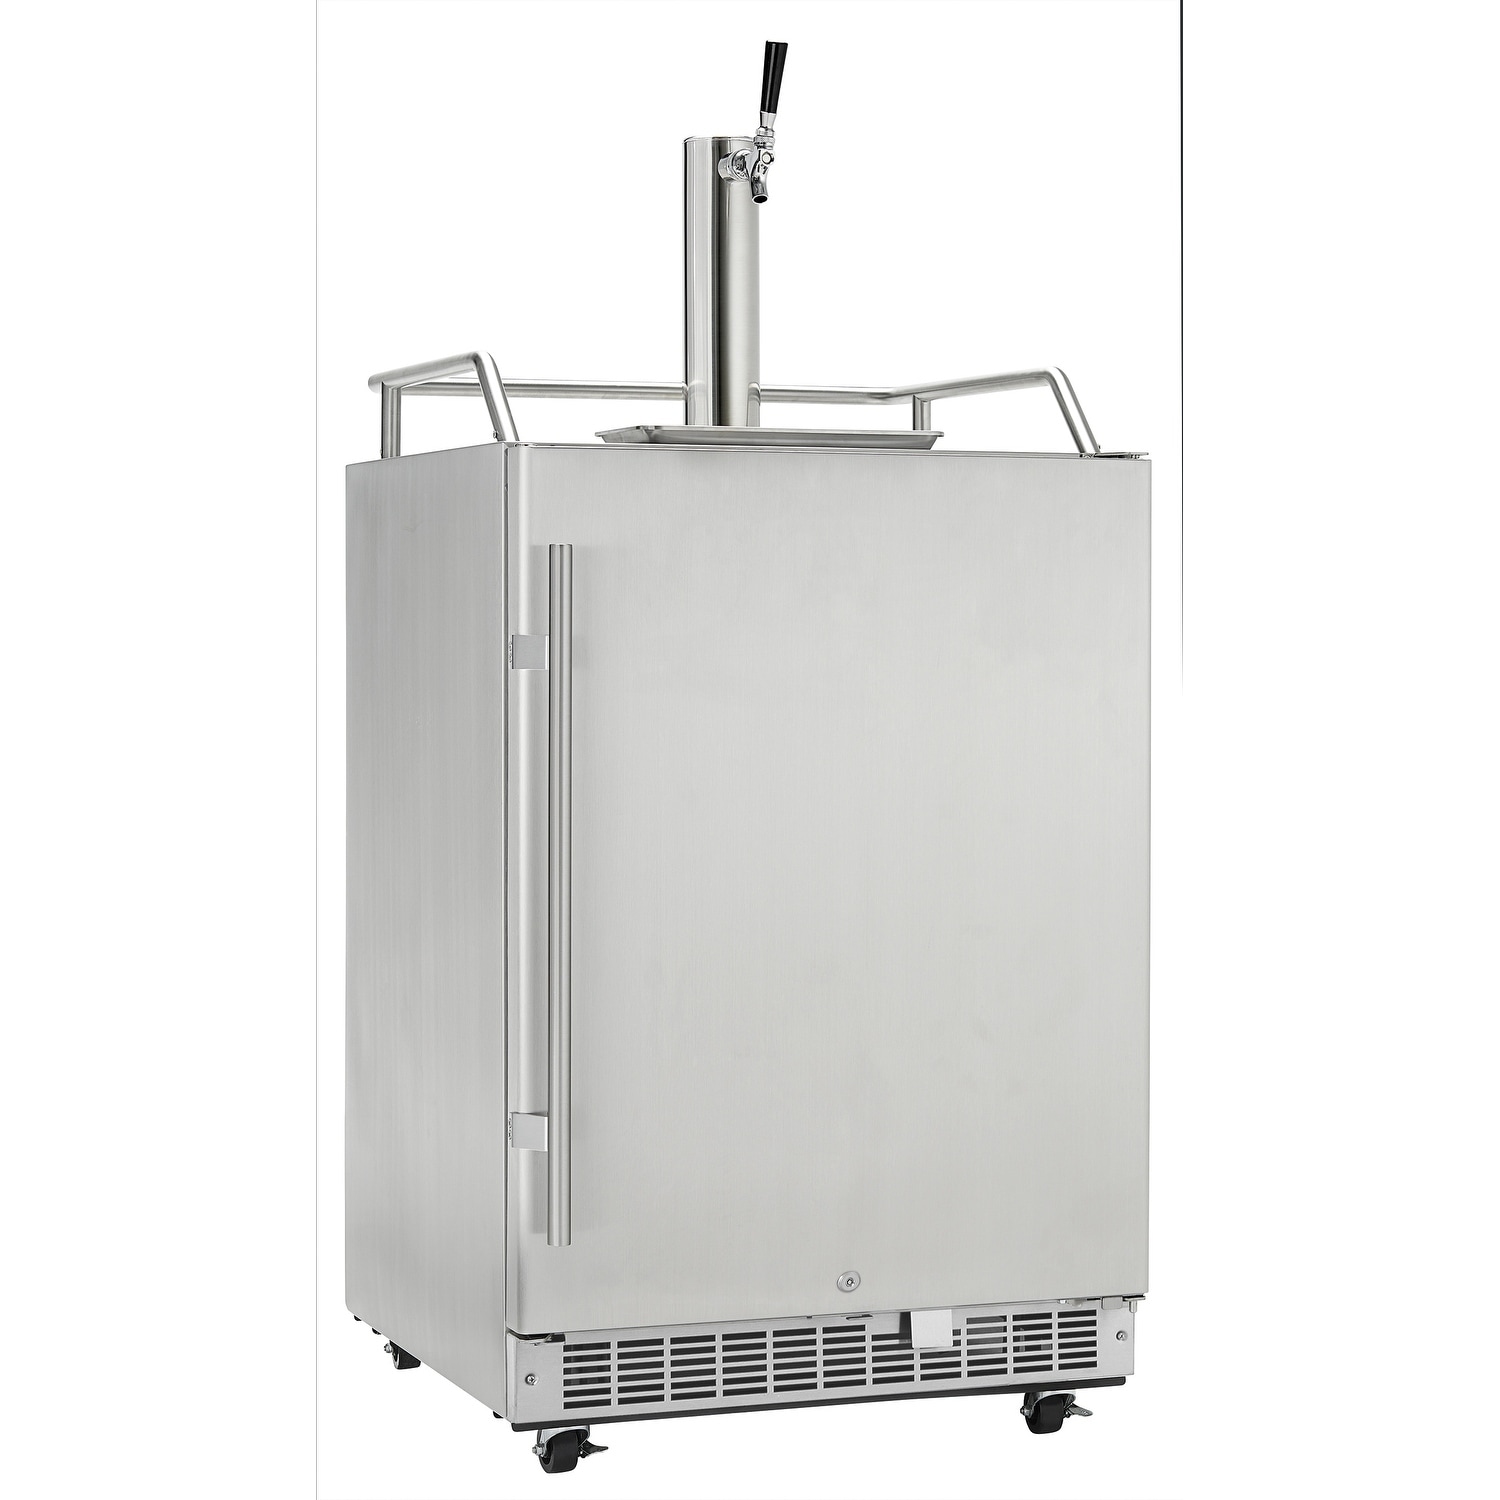 Danby Silhouette Professional 5.5 Cu. Ft. Outdoor Rated Keg Cooler in Stainless Steel